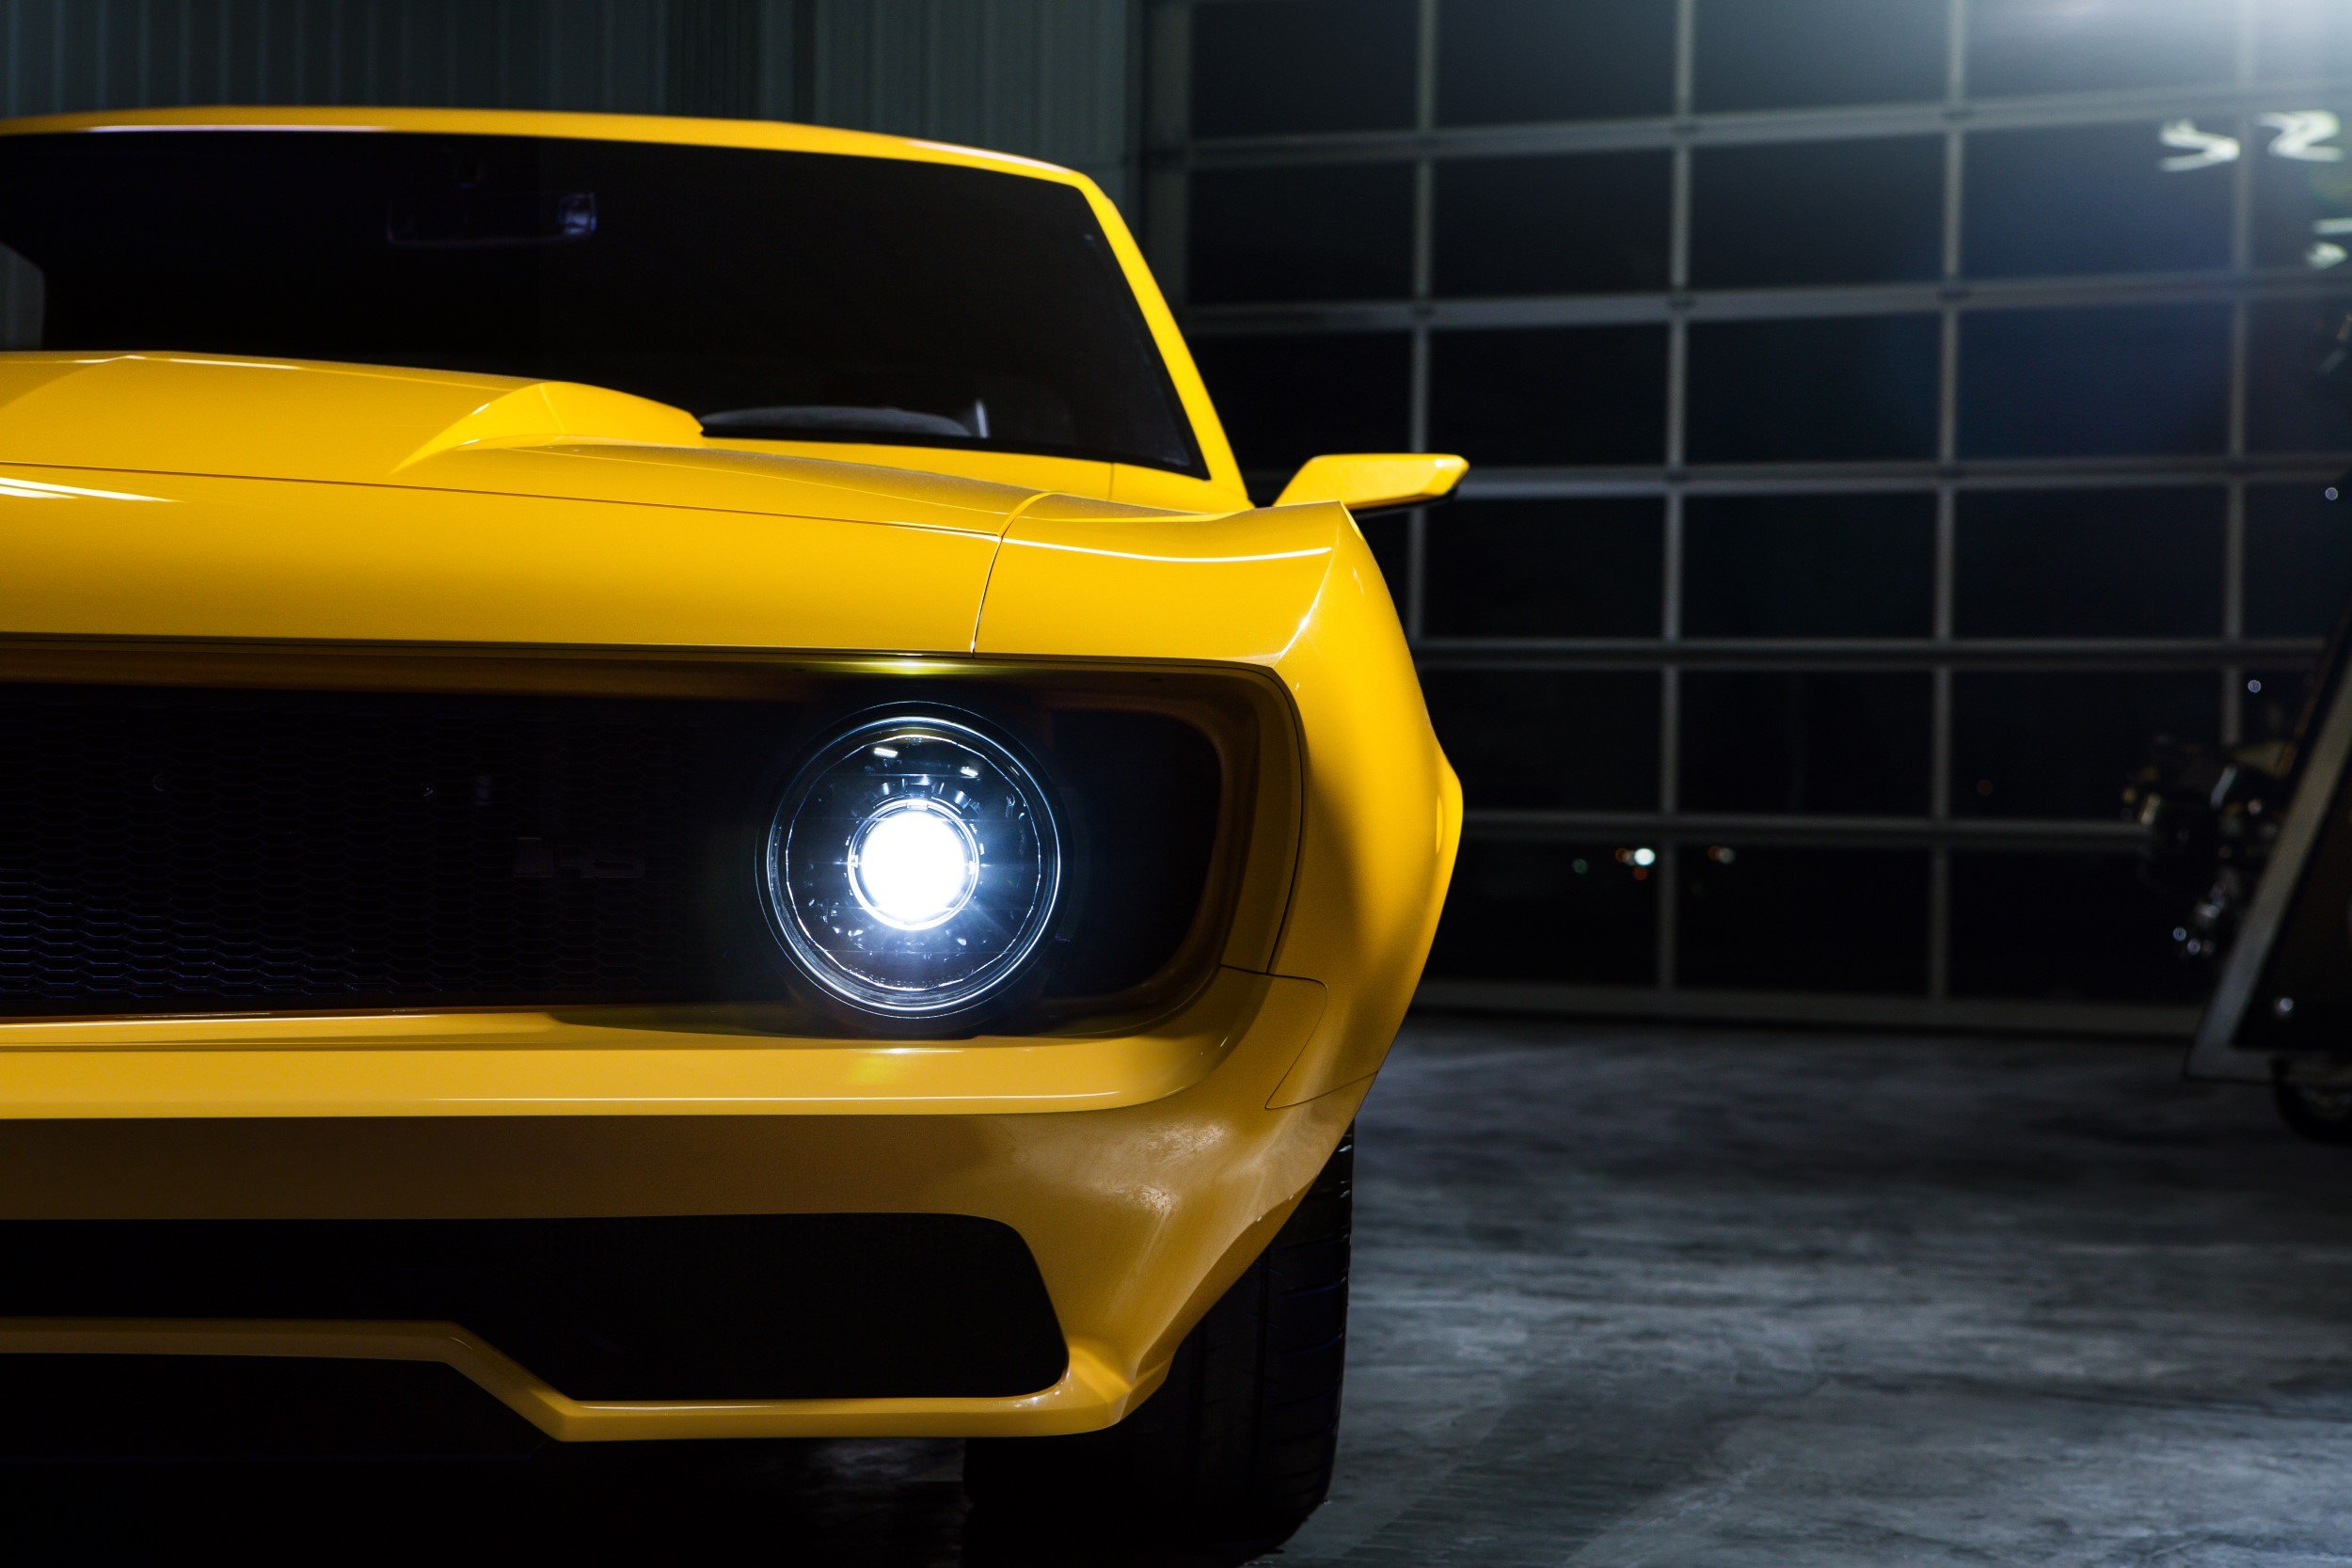 Aftermarket Vented Hood on Yellow Chevy Camaro - Photo by Roadster Shop